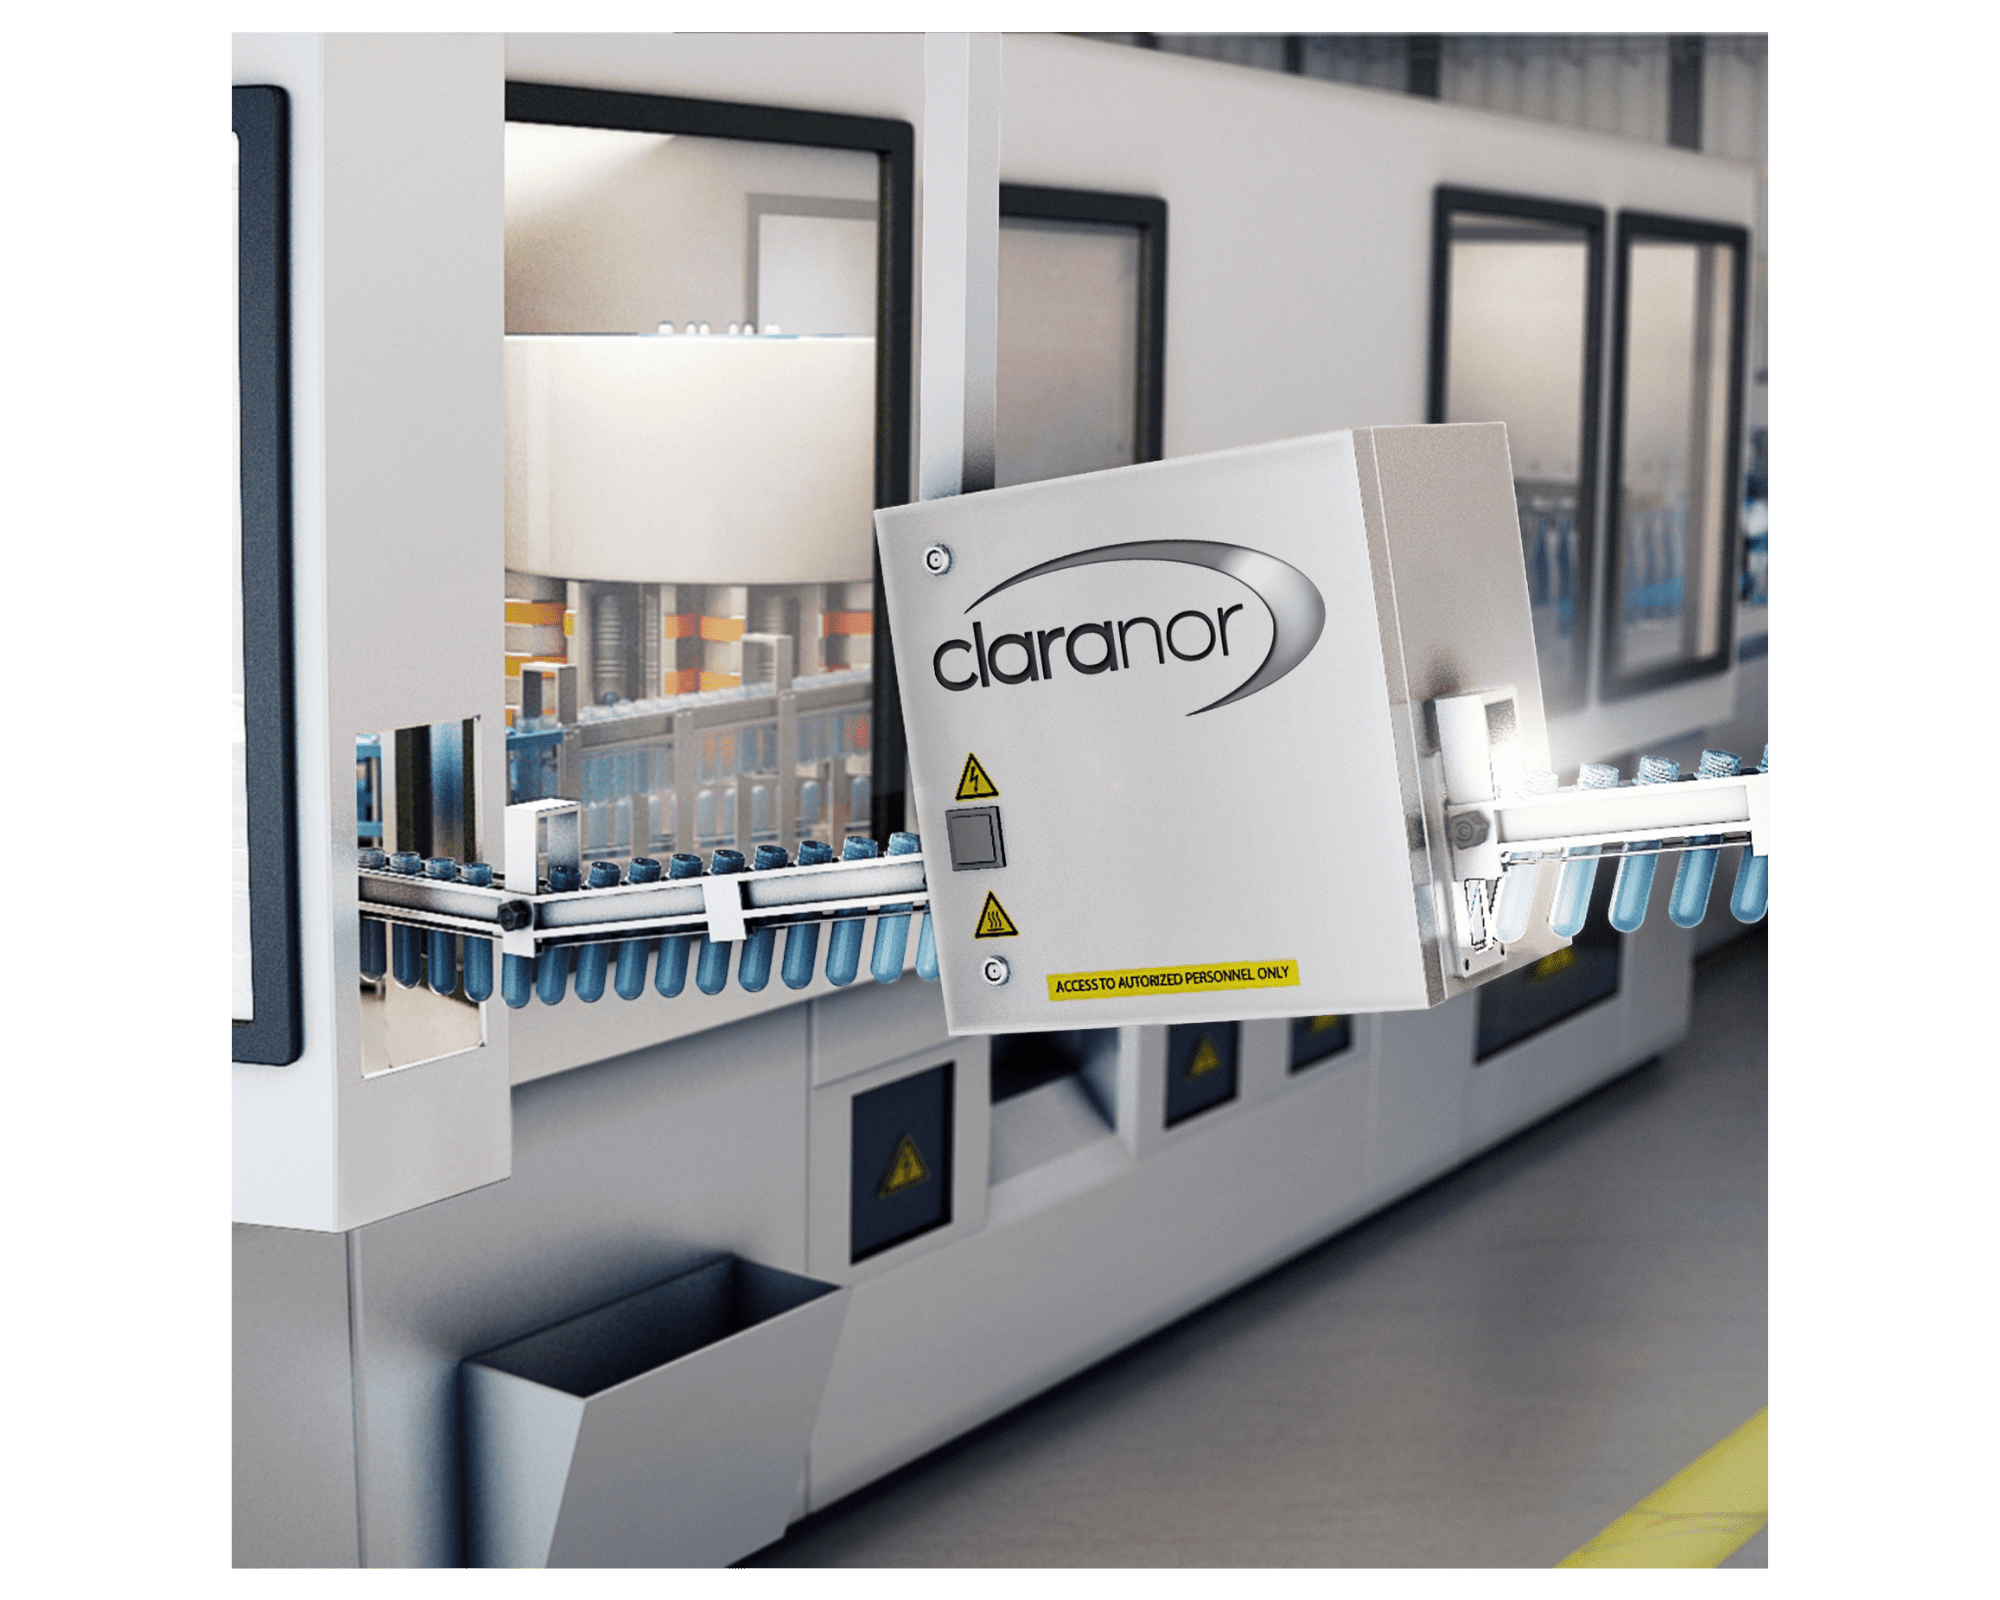 Beverages industry: Pulsed Light Pack Expo 2022, Dairy &#038; beverages: Pulsed Light at PackExpo 2022